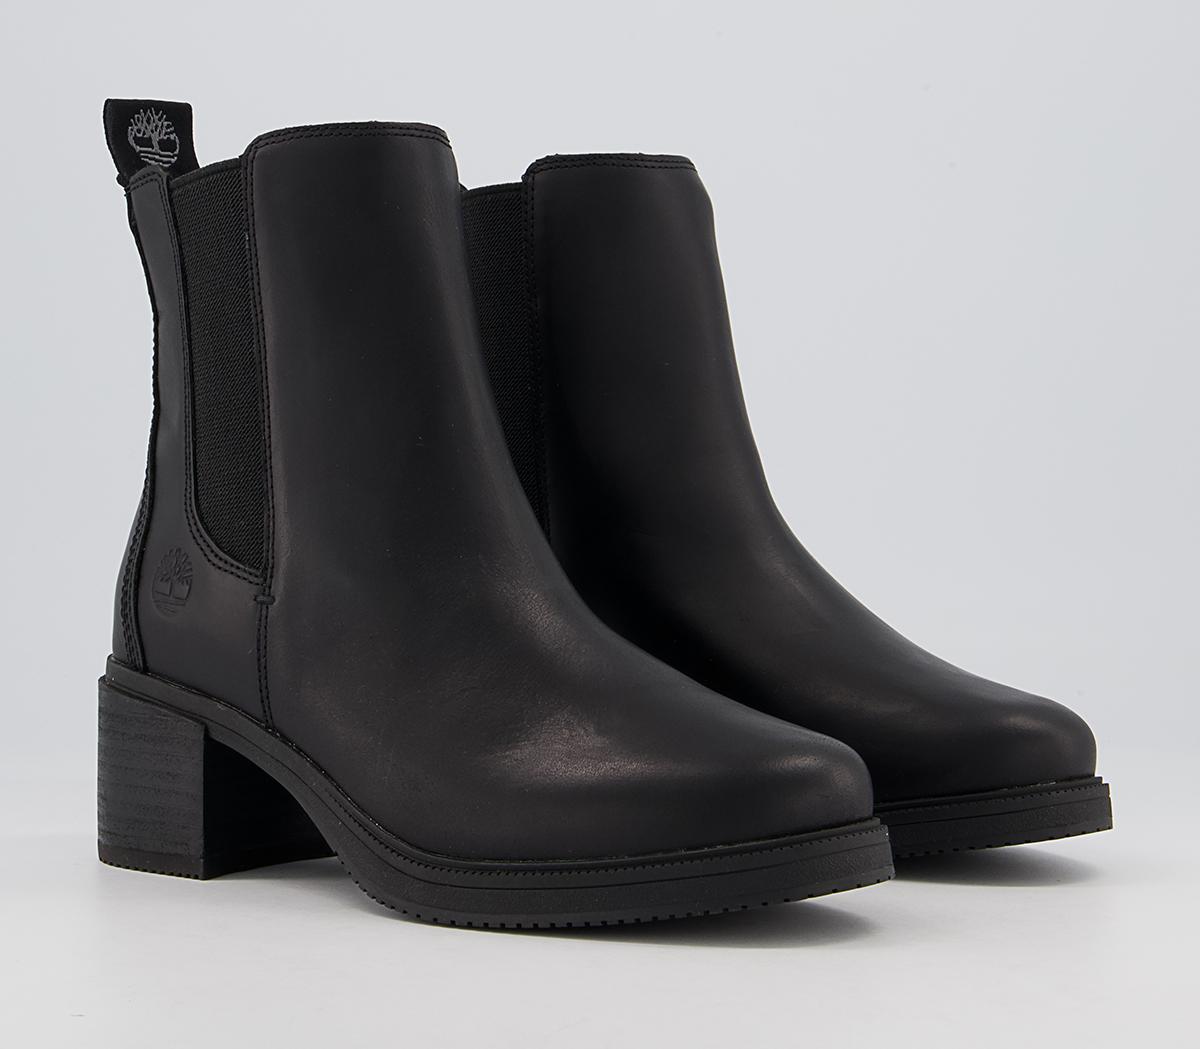 Timberland Dalston Vibe Heeled Chelsea Boots Black - Women's Ankle Boots